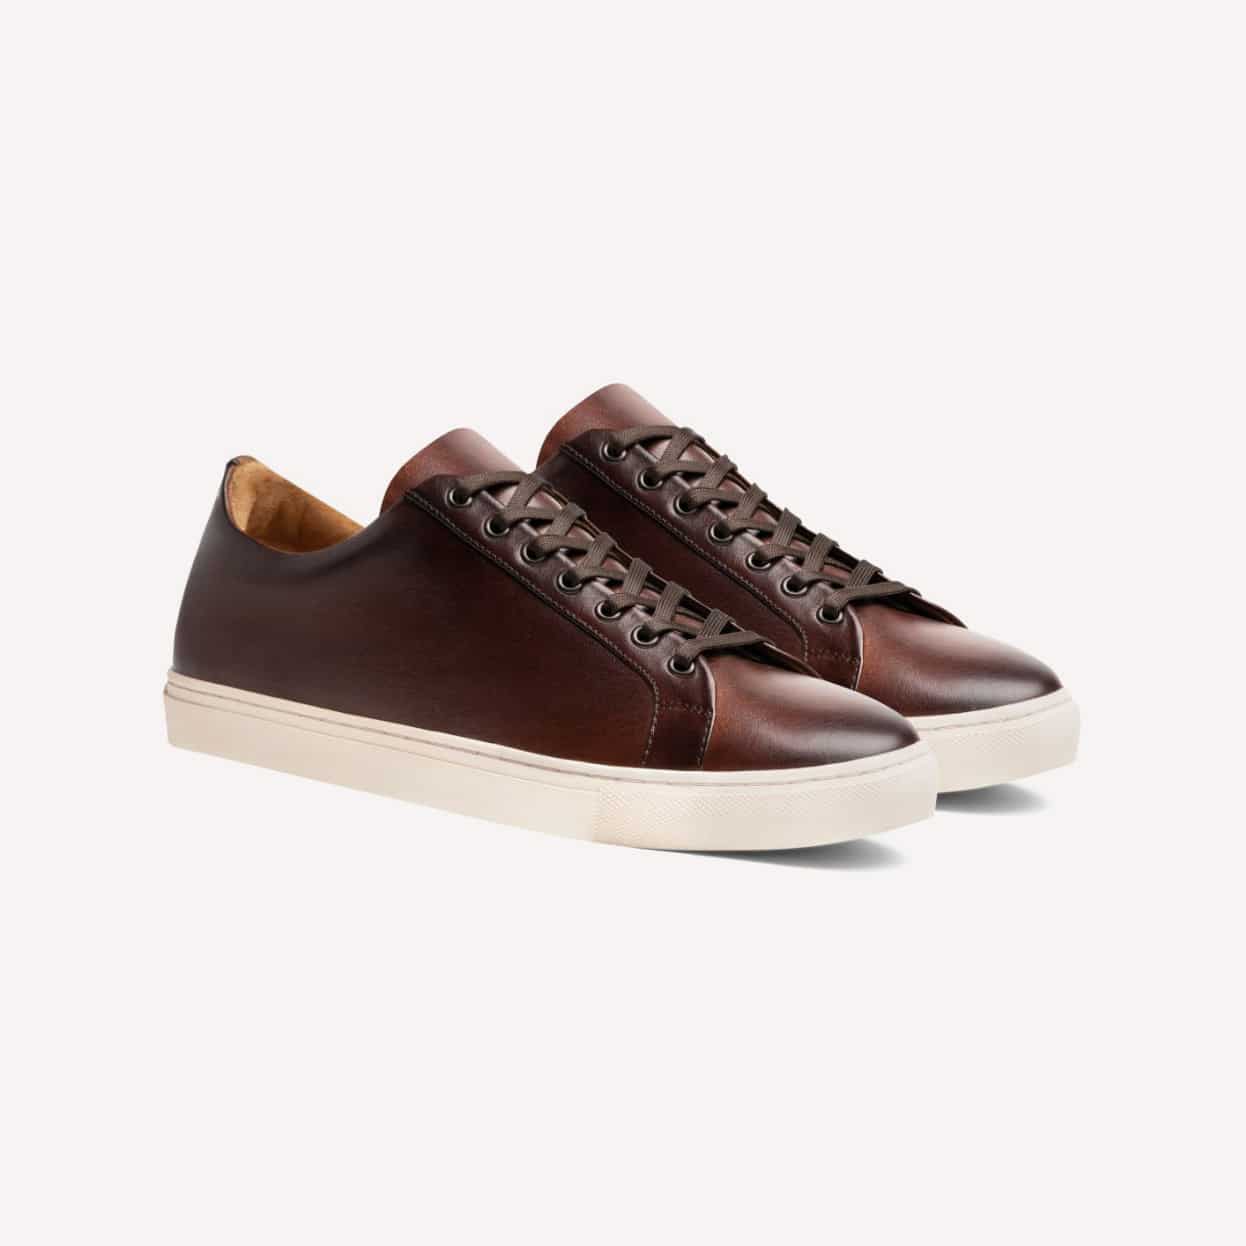 Best Brown Leather Sneakers for Men in 2023 - The Modest Man